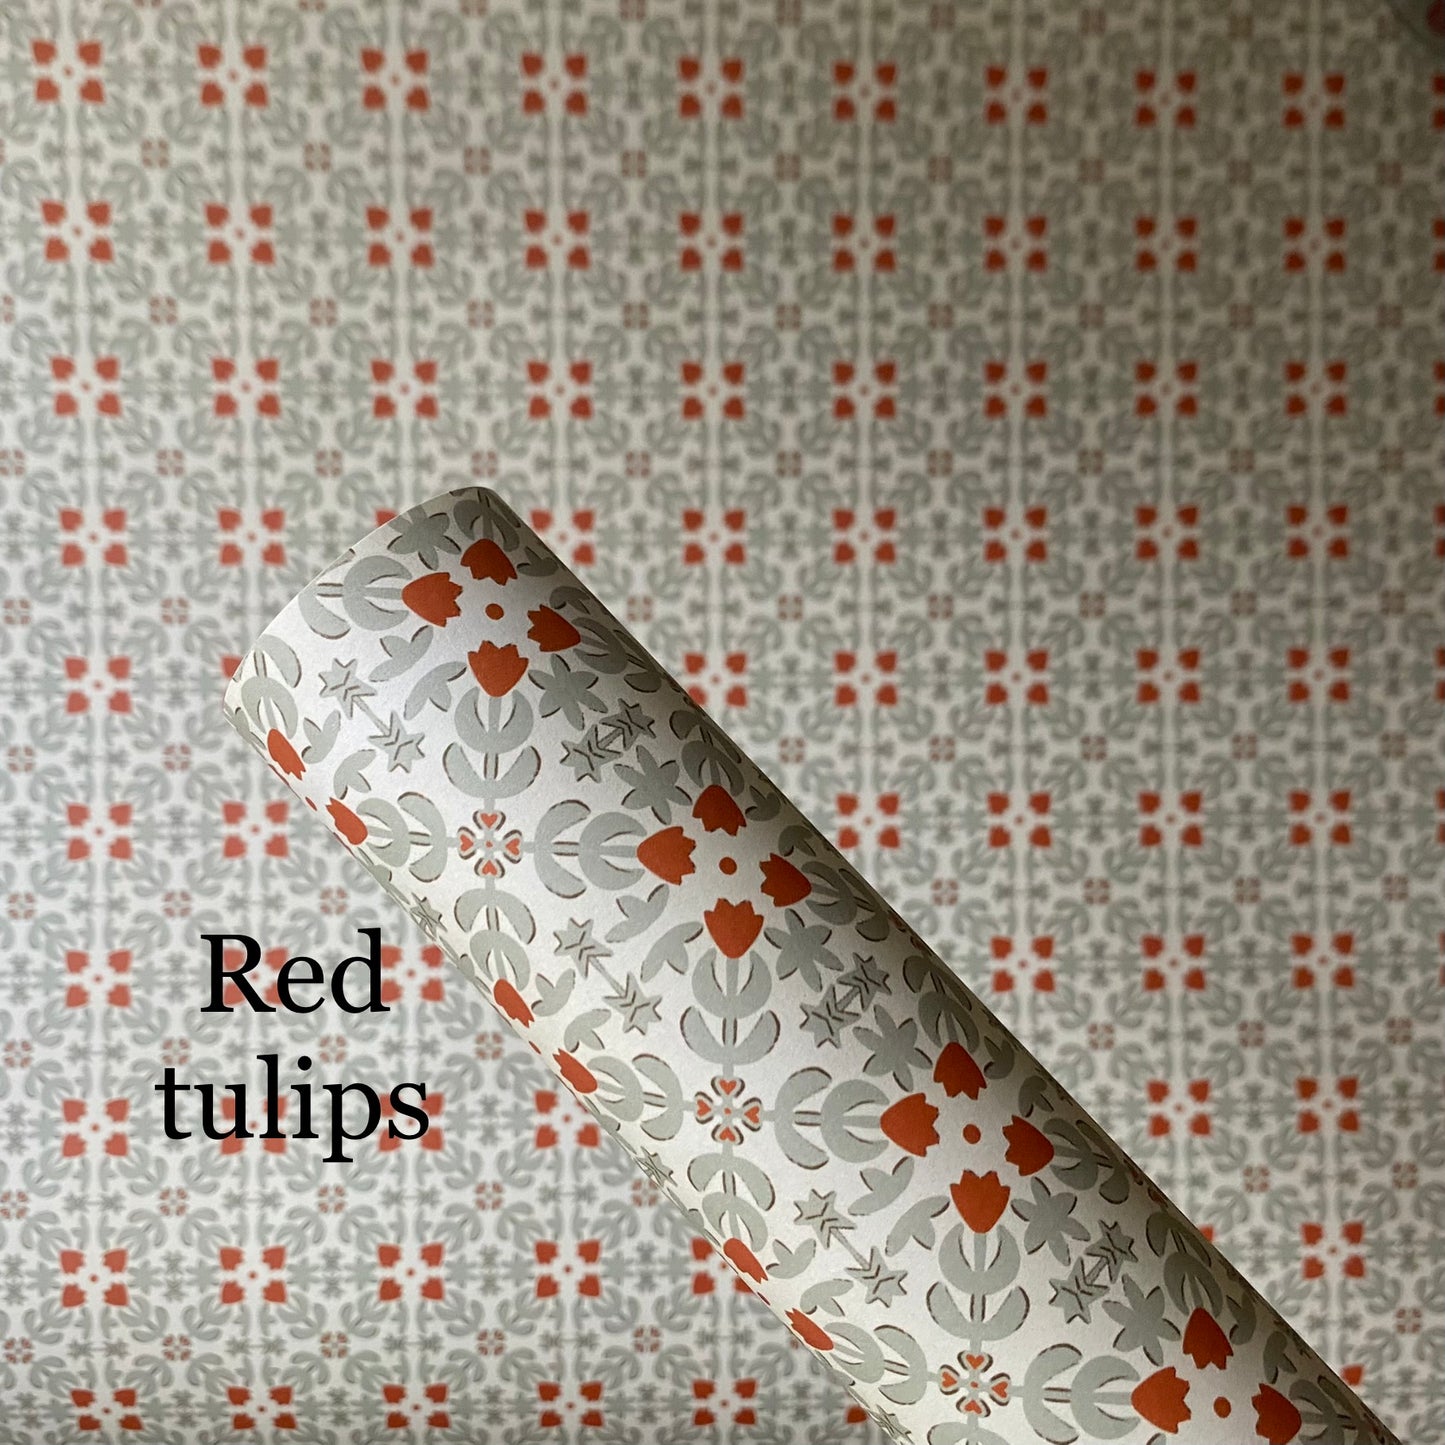 Wrapping paper collection 2